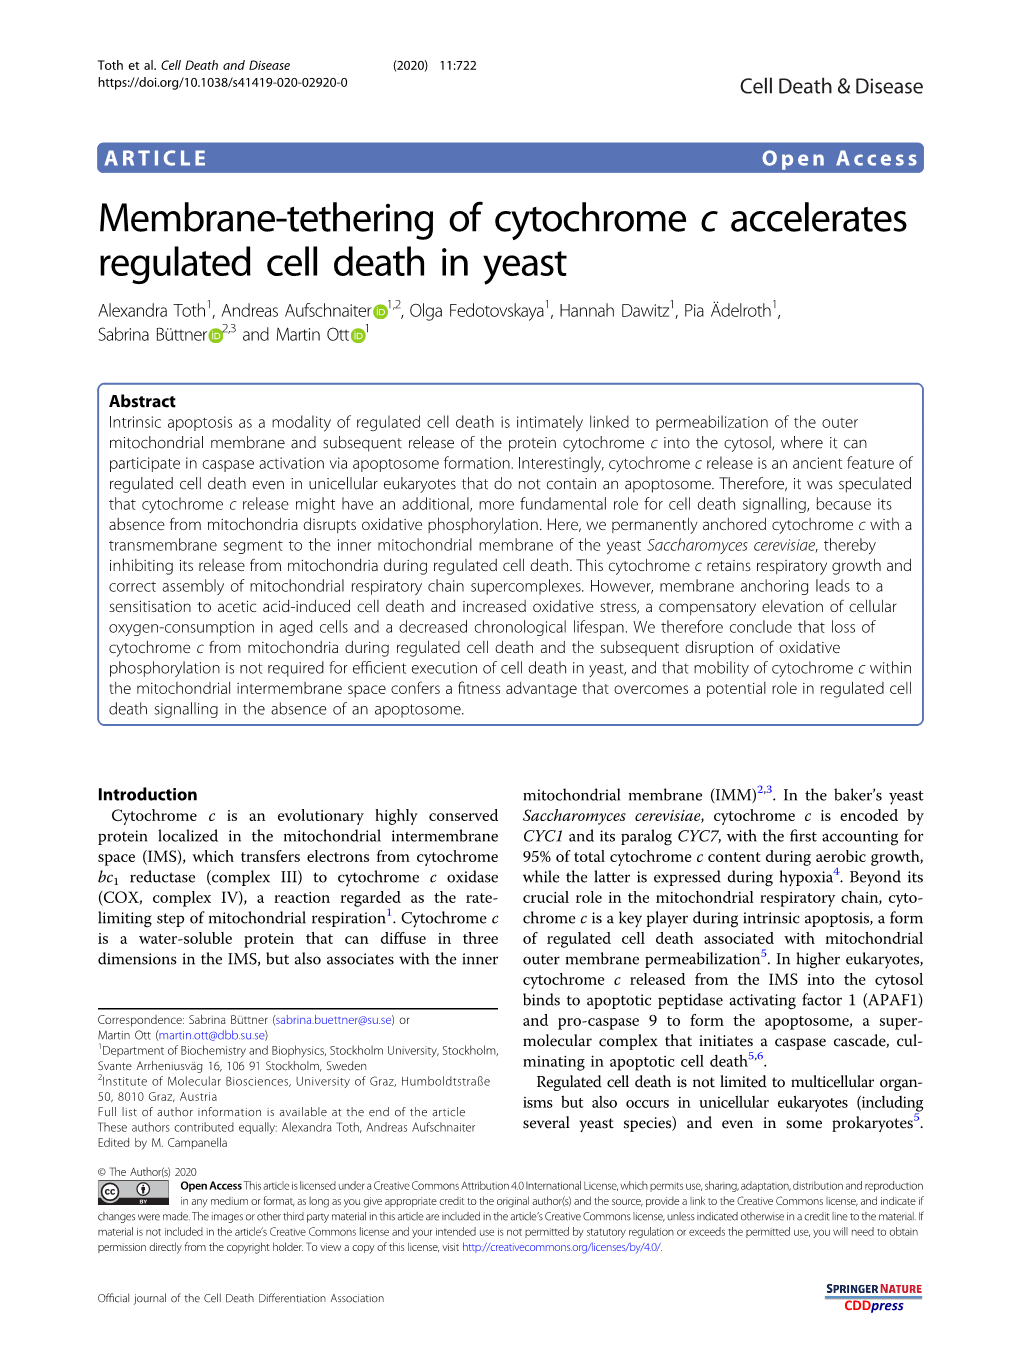 Membrane-Tethering of Cytochrome C Accelerates Regulated Cell Death In